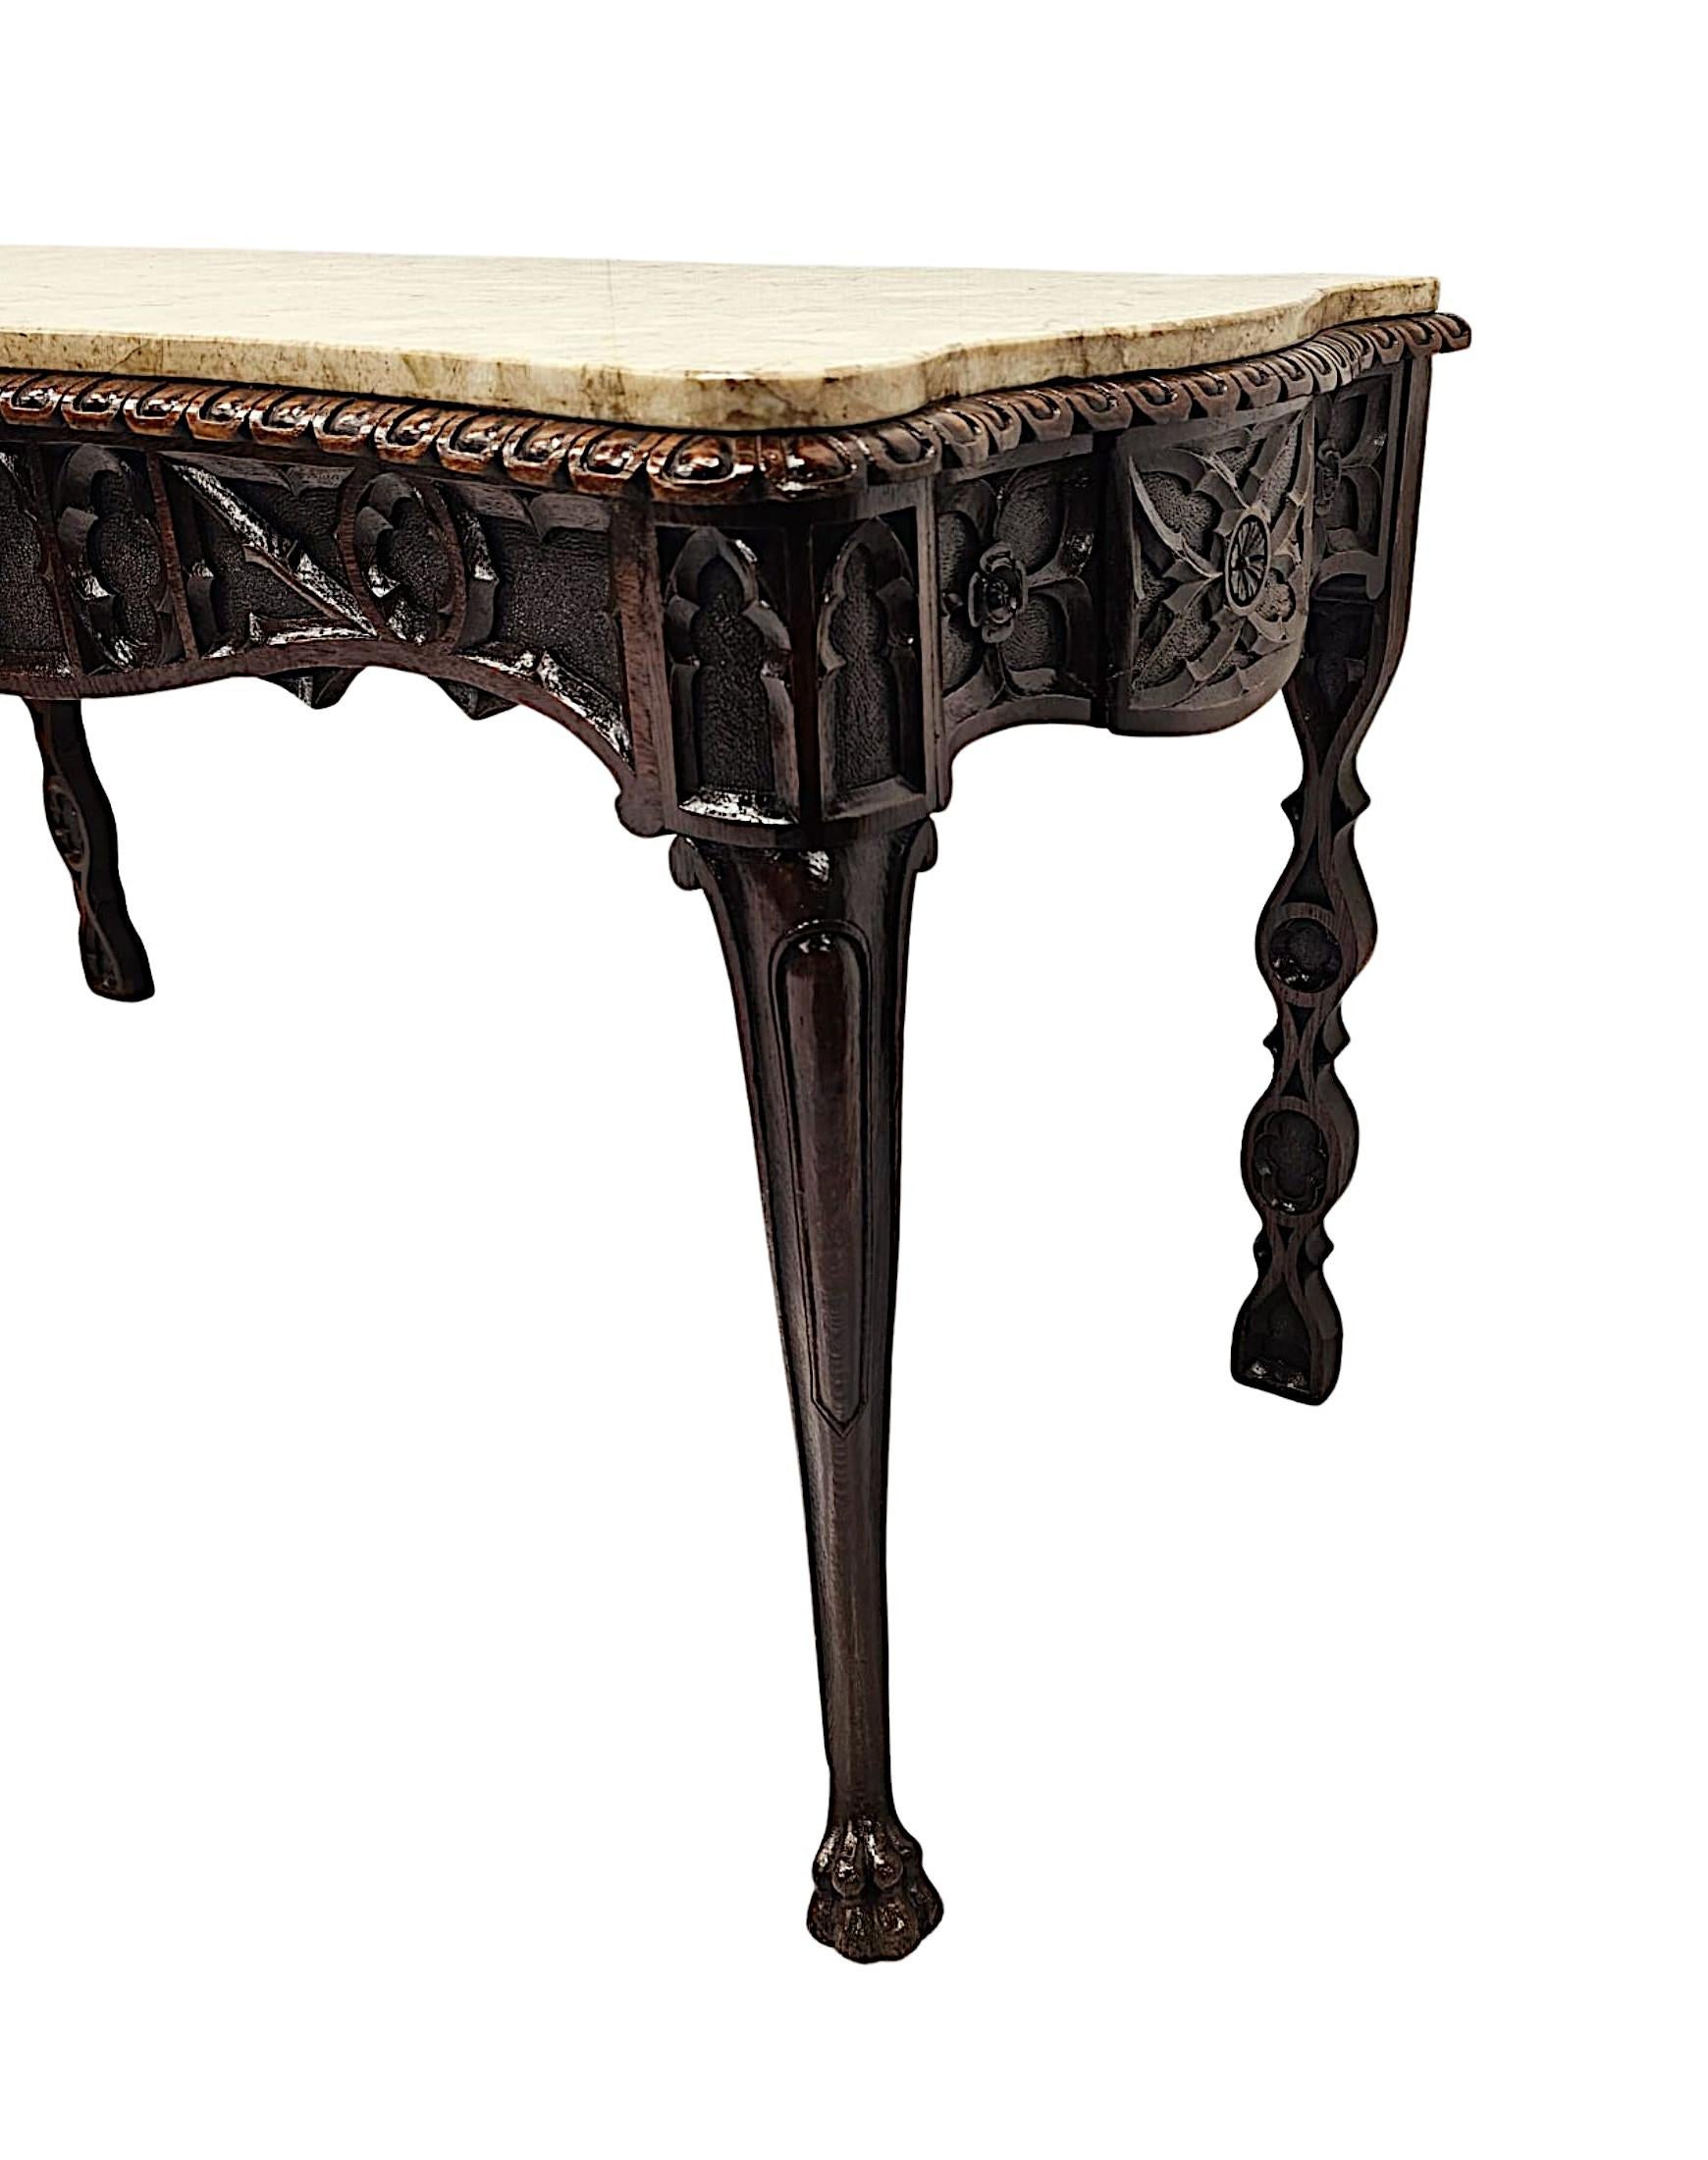  A Very Rare and Fine 19th Century Irish Gothic Hall or Console Table  For Sale 3